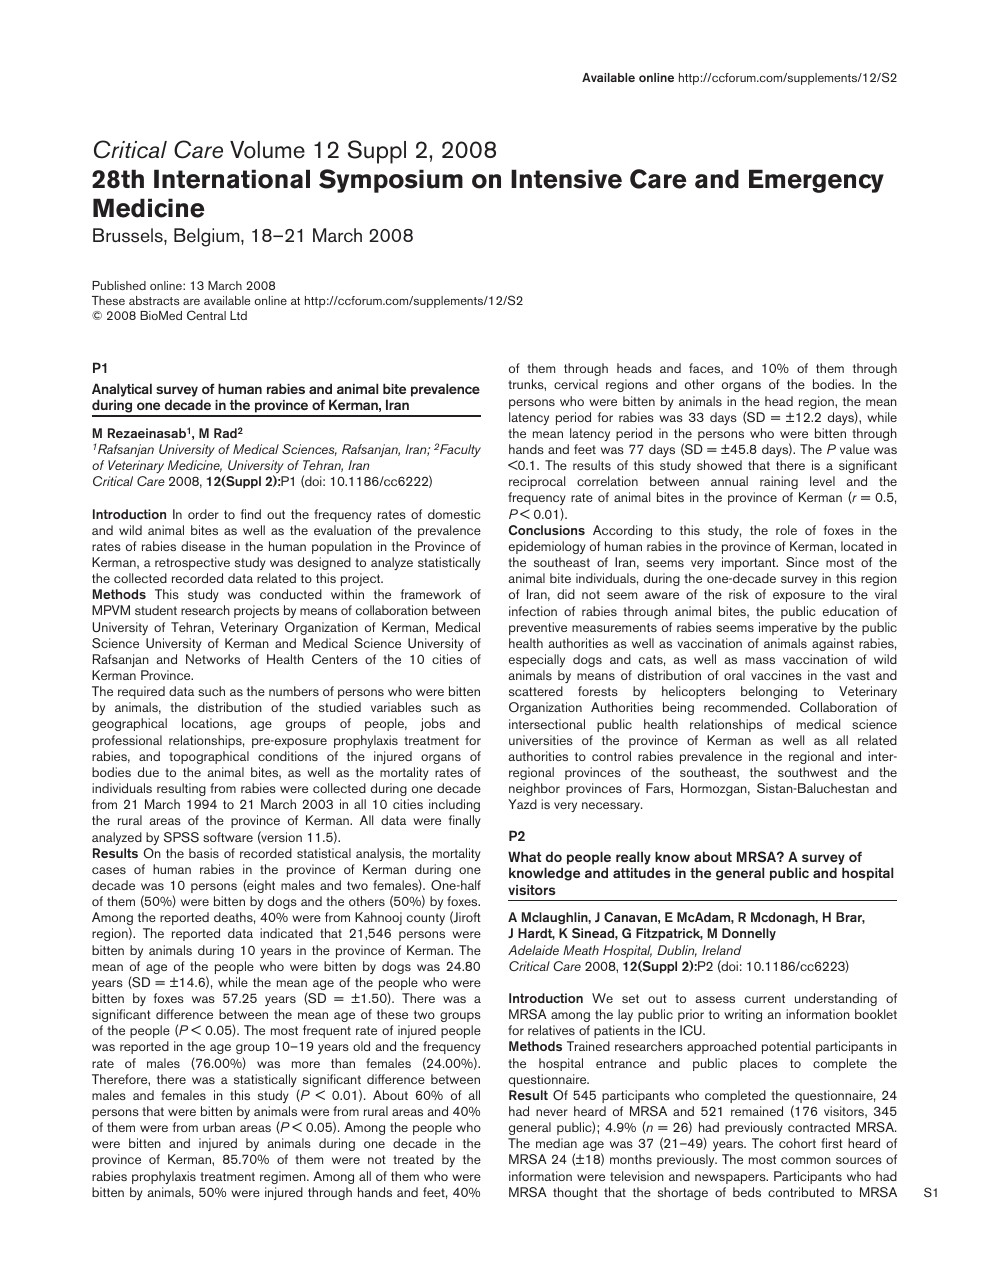 Veterinary Emergency And Critical Care Society Emergency Drug Chart